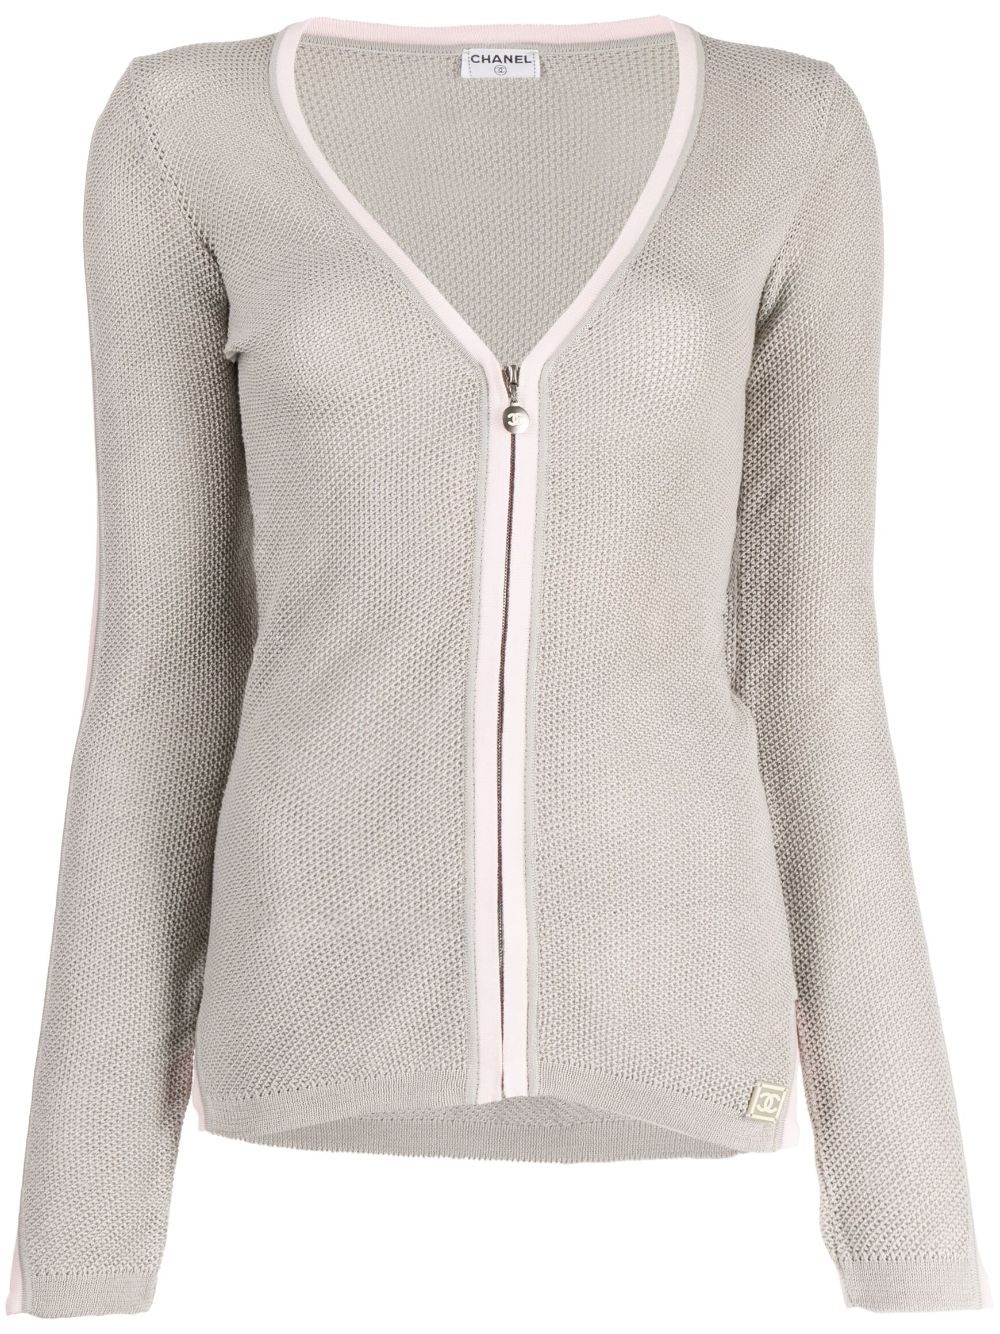 CHANEL Pre-Owned 2003 Sports Line zip-front top - Grey von CHANEL Pre-Owned